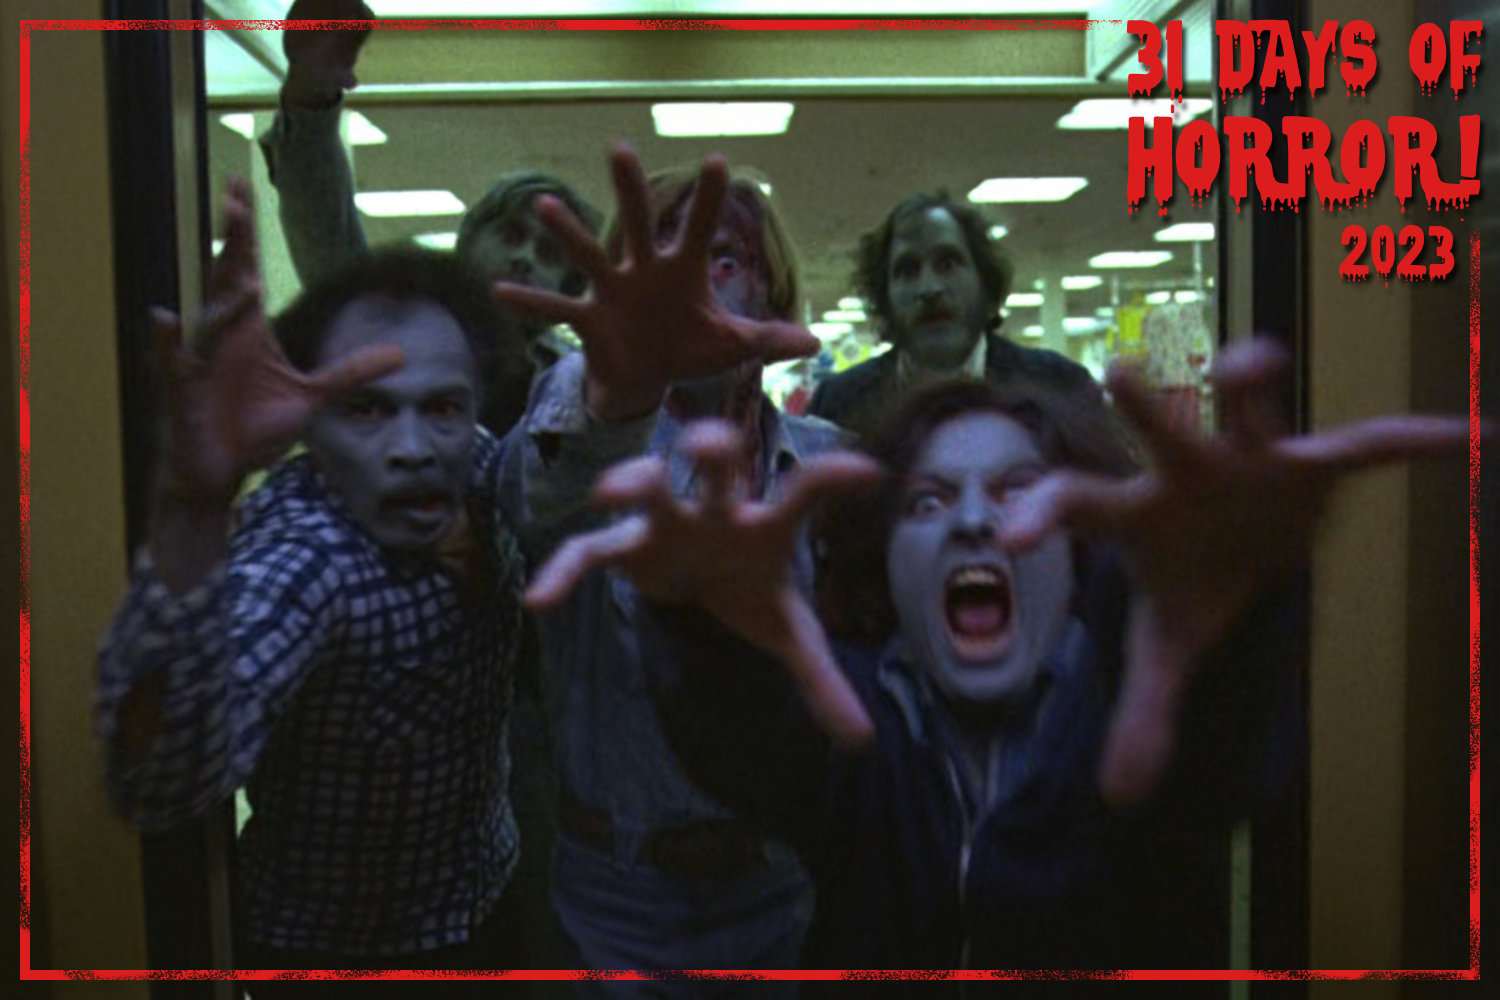 Oct. 31: 'Dawn of the Dead